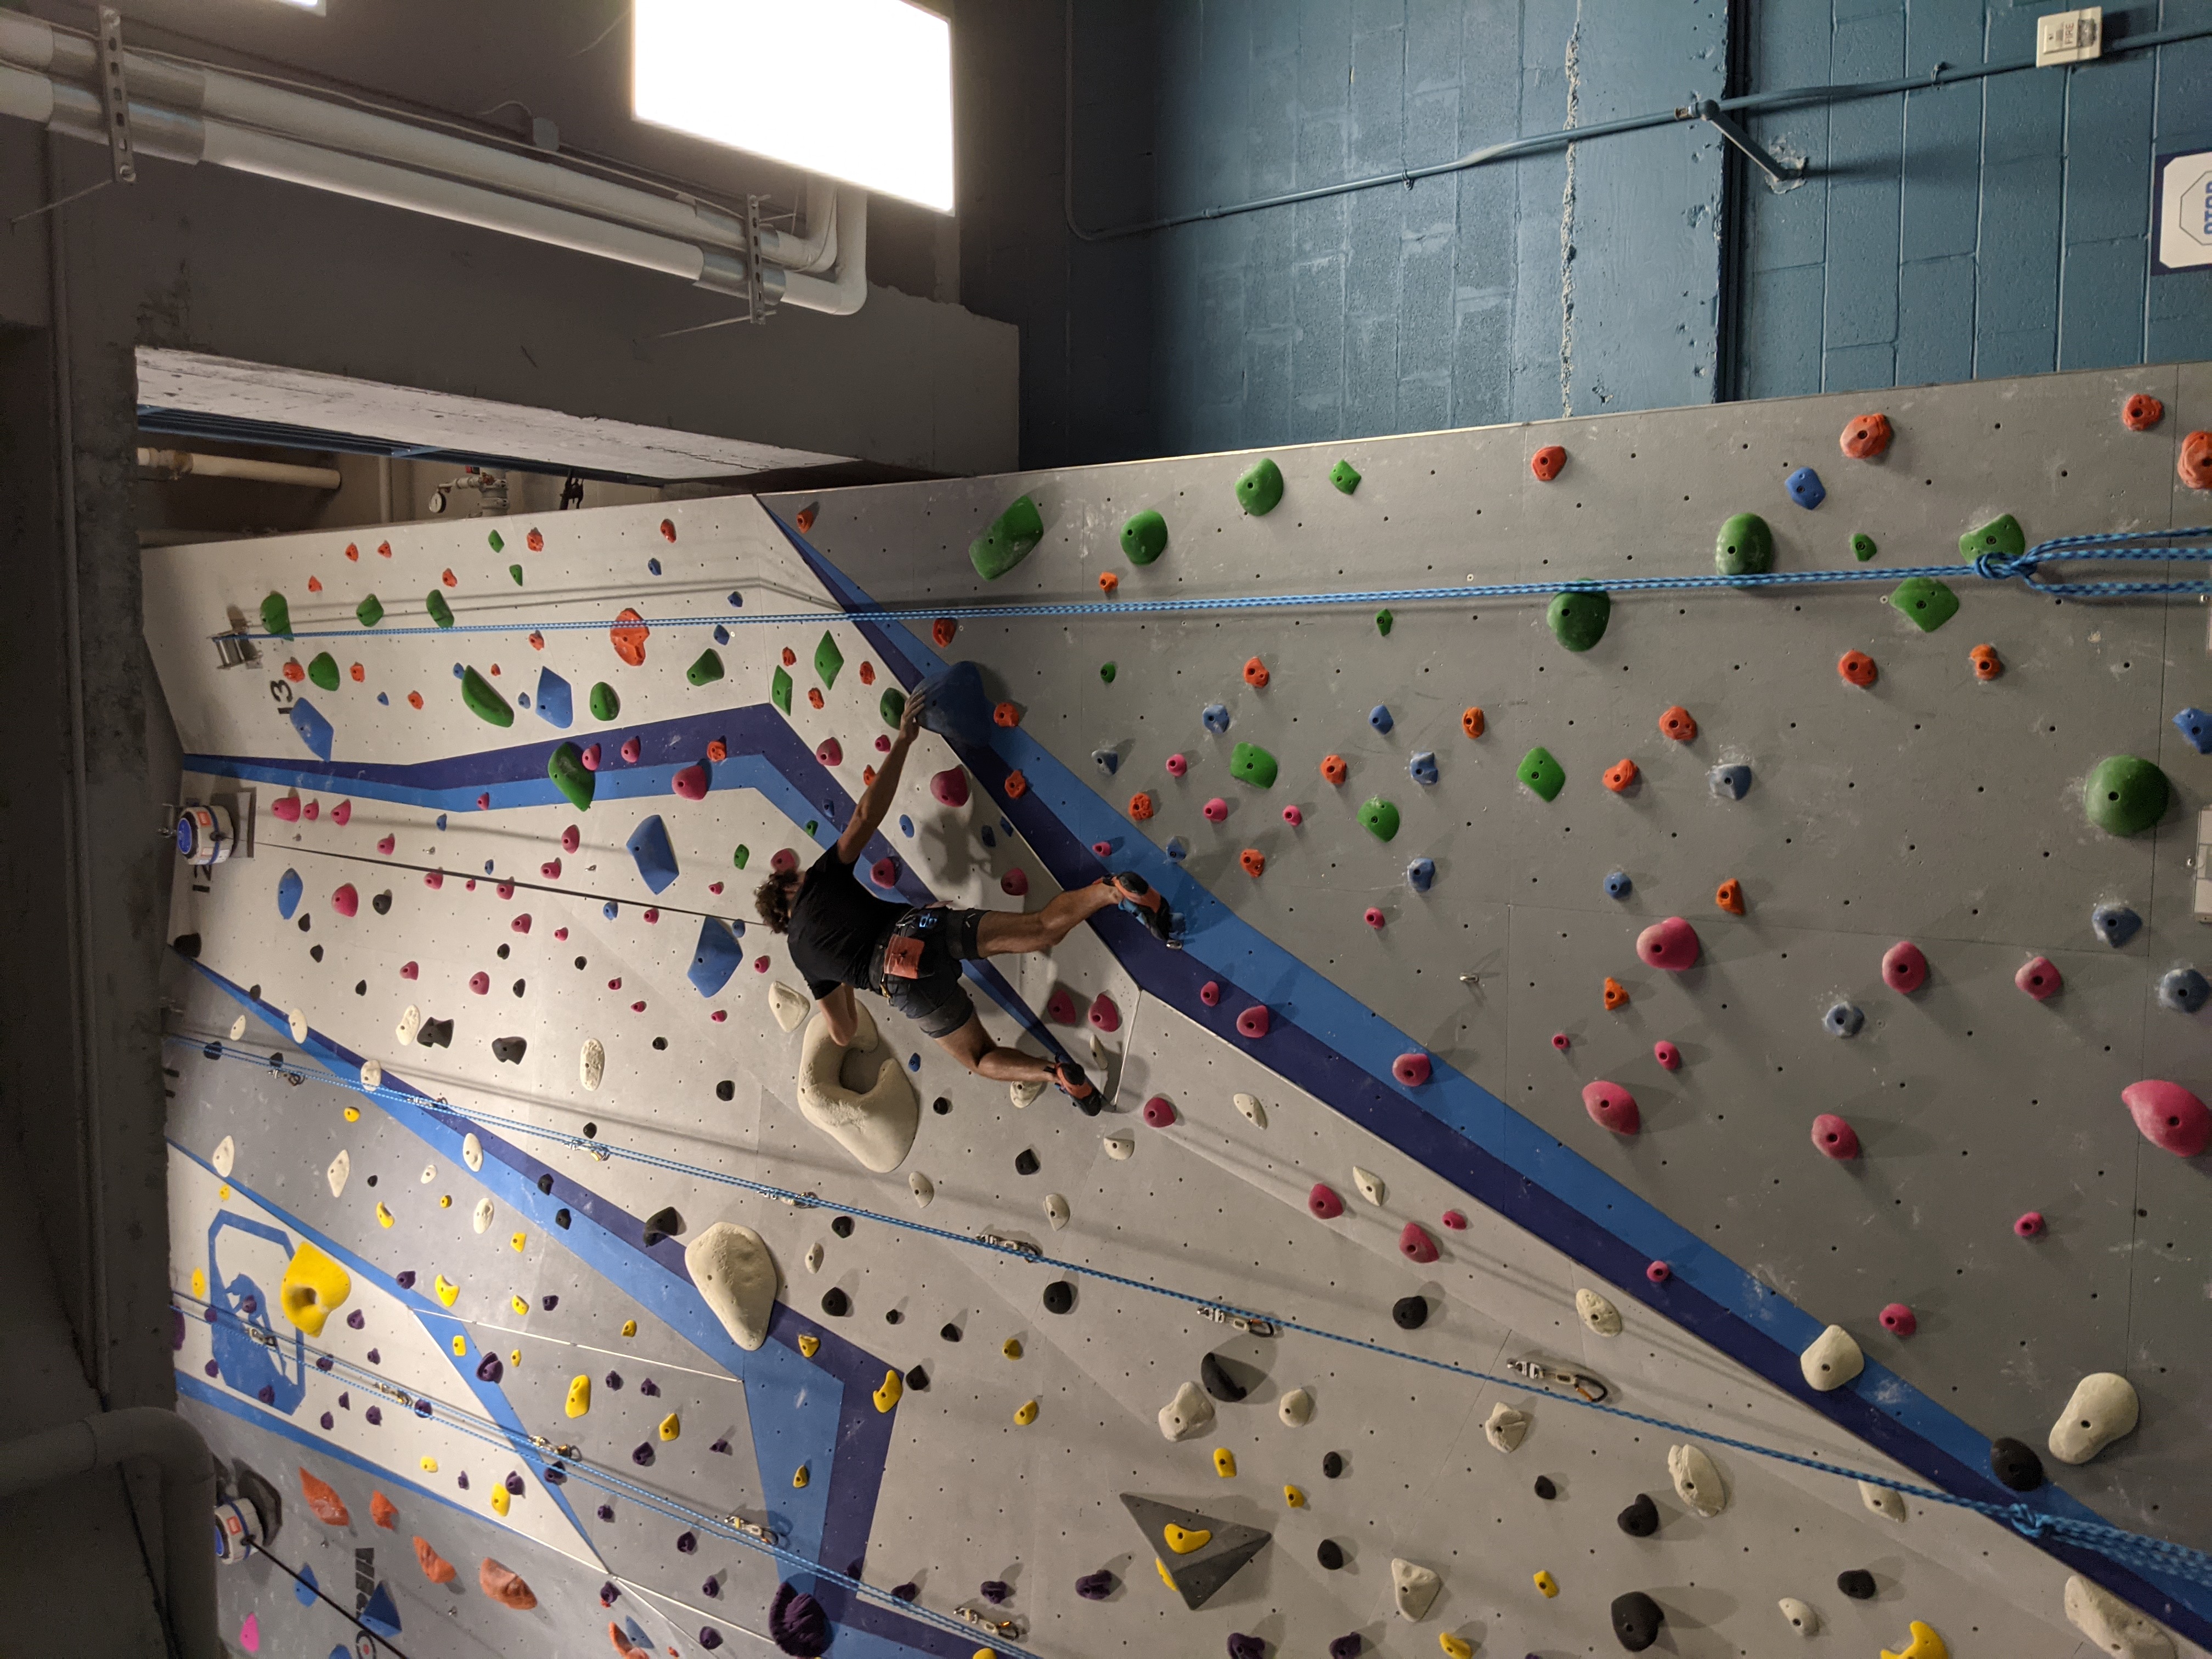 Embarrassingly, the only picture I have of myself climbing is on autobelay.